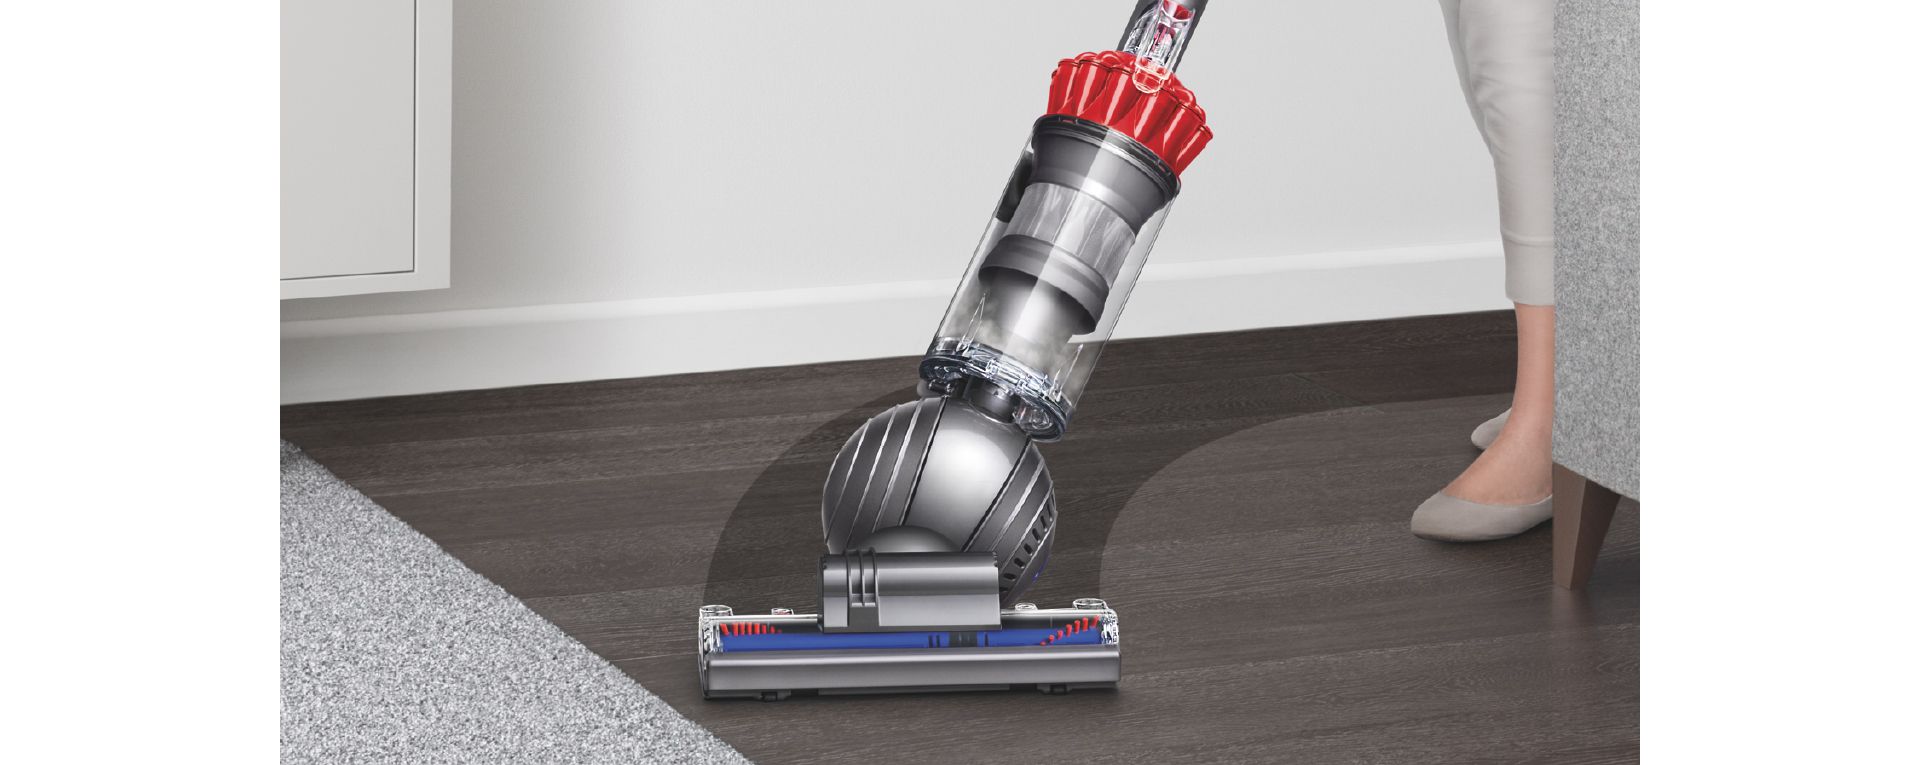 Upright vacuum cleaner being steered in a sweeping arc across a black hard floor surface. 